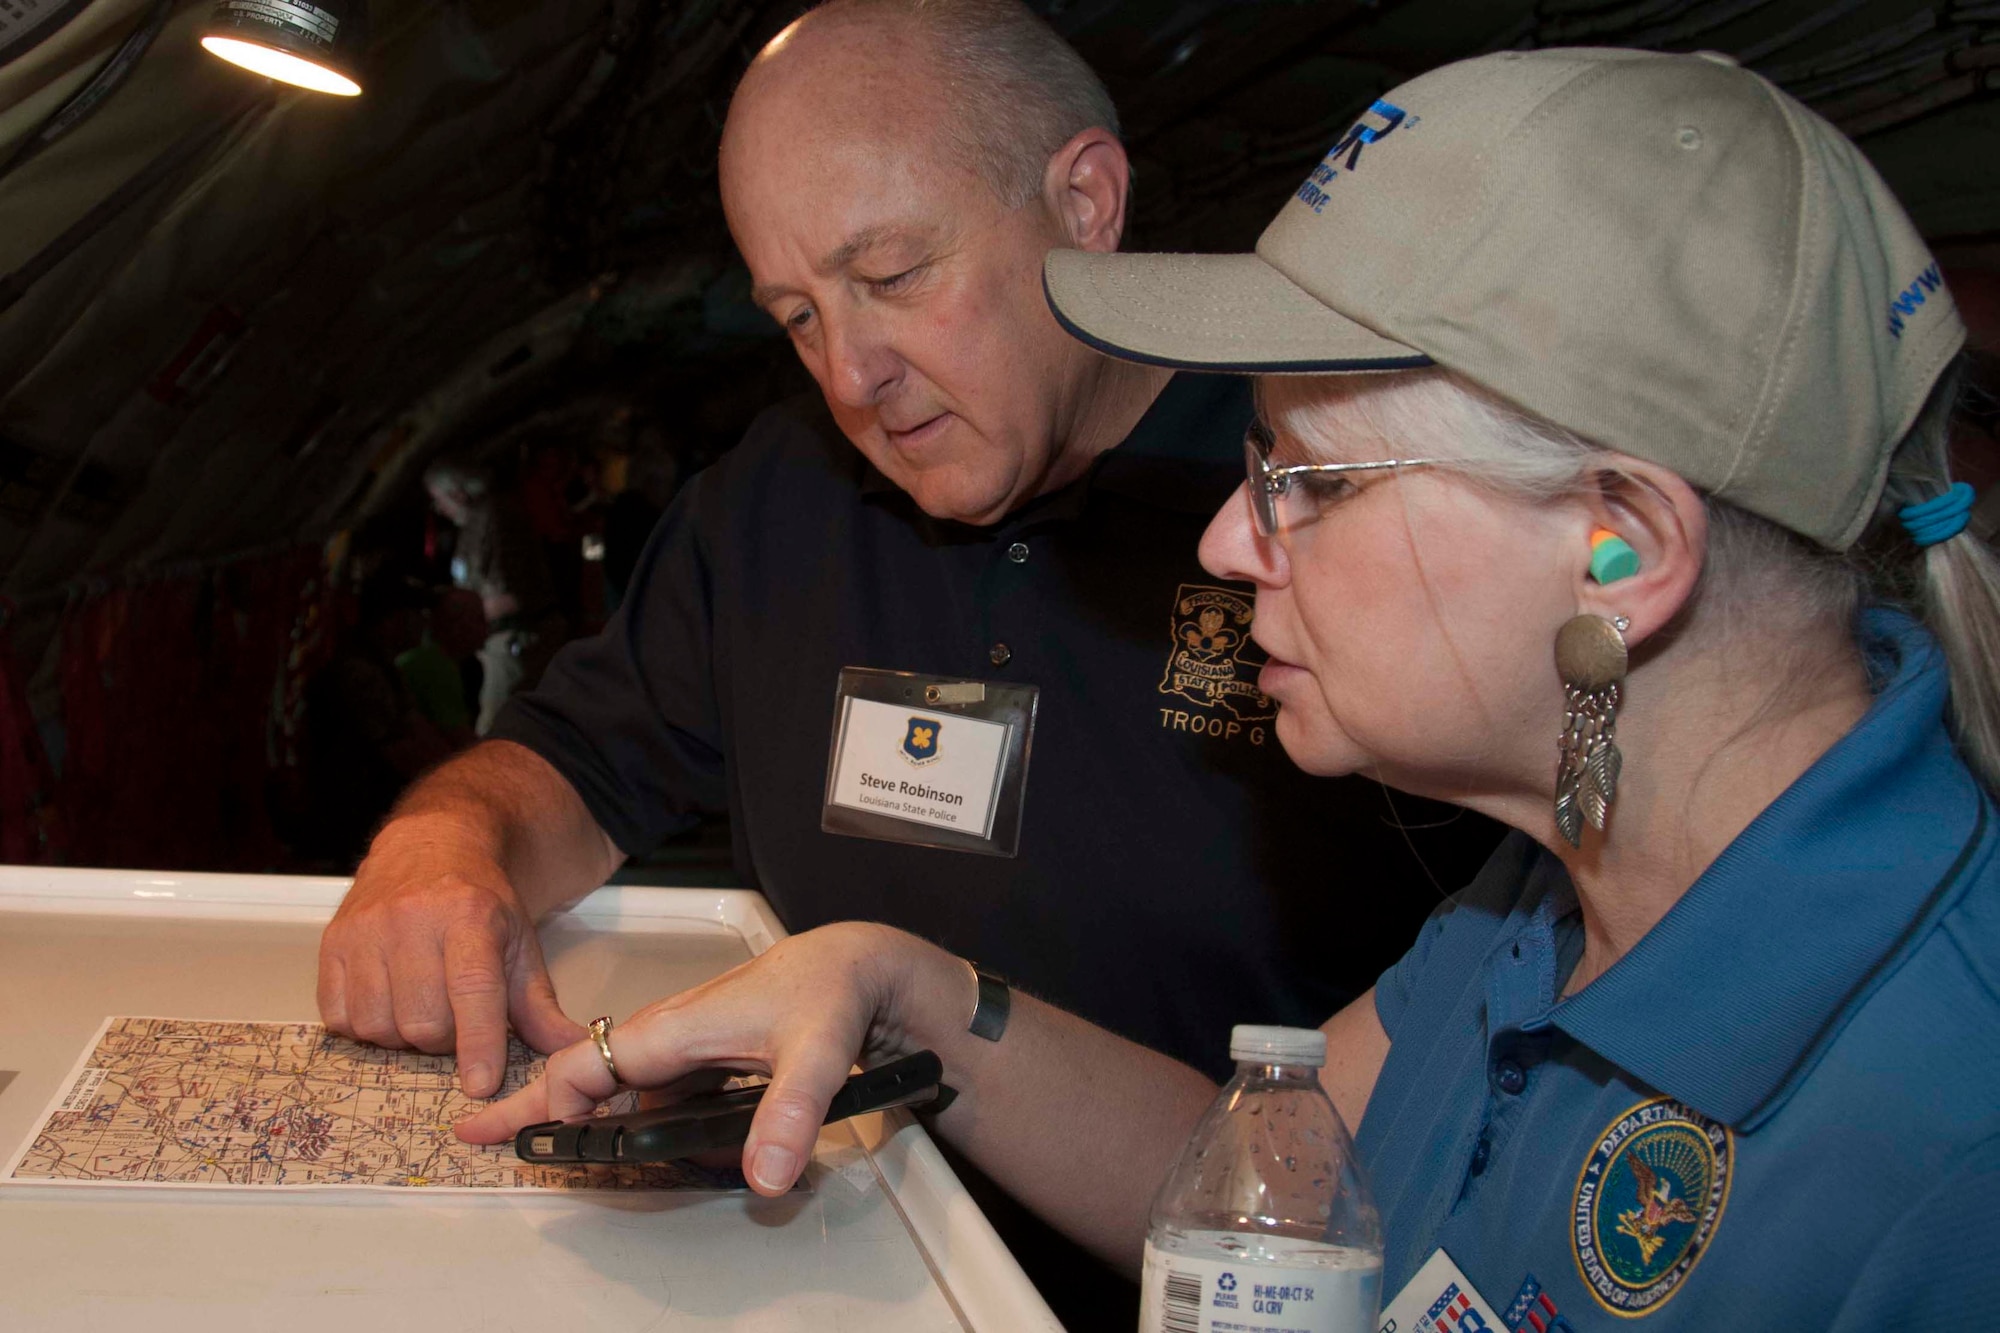 Steve Robinson and Ruth Medcalf review the flight map of the KC-135 Stratotanker during a refueling flight for the 307th Bomb Wing’s Employer Appreciation Day, Barksdale Air Force Base, La., May 14, 2016.  This event allows 307th BW members to nominate their employers to take part in a flight and other events that build a greater understanding of the demands faced by Reservists, as well as gives the wing an opportunity to thank civilian employers for being flexible in working with the reservists.   (U.S. Air Force photo by Tech. Sgt. Ted Daigle/released)